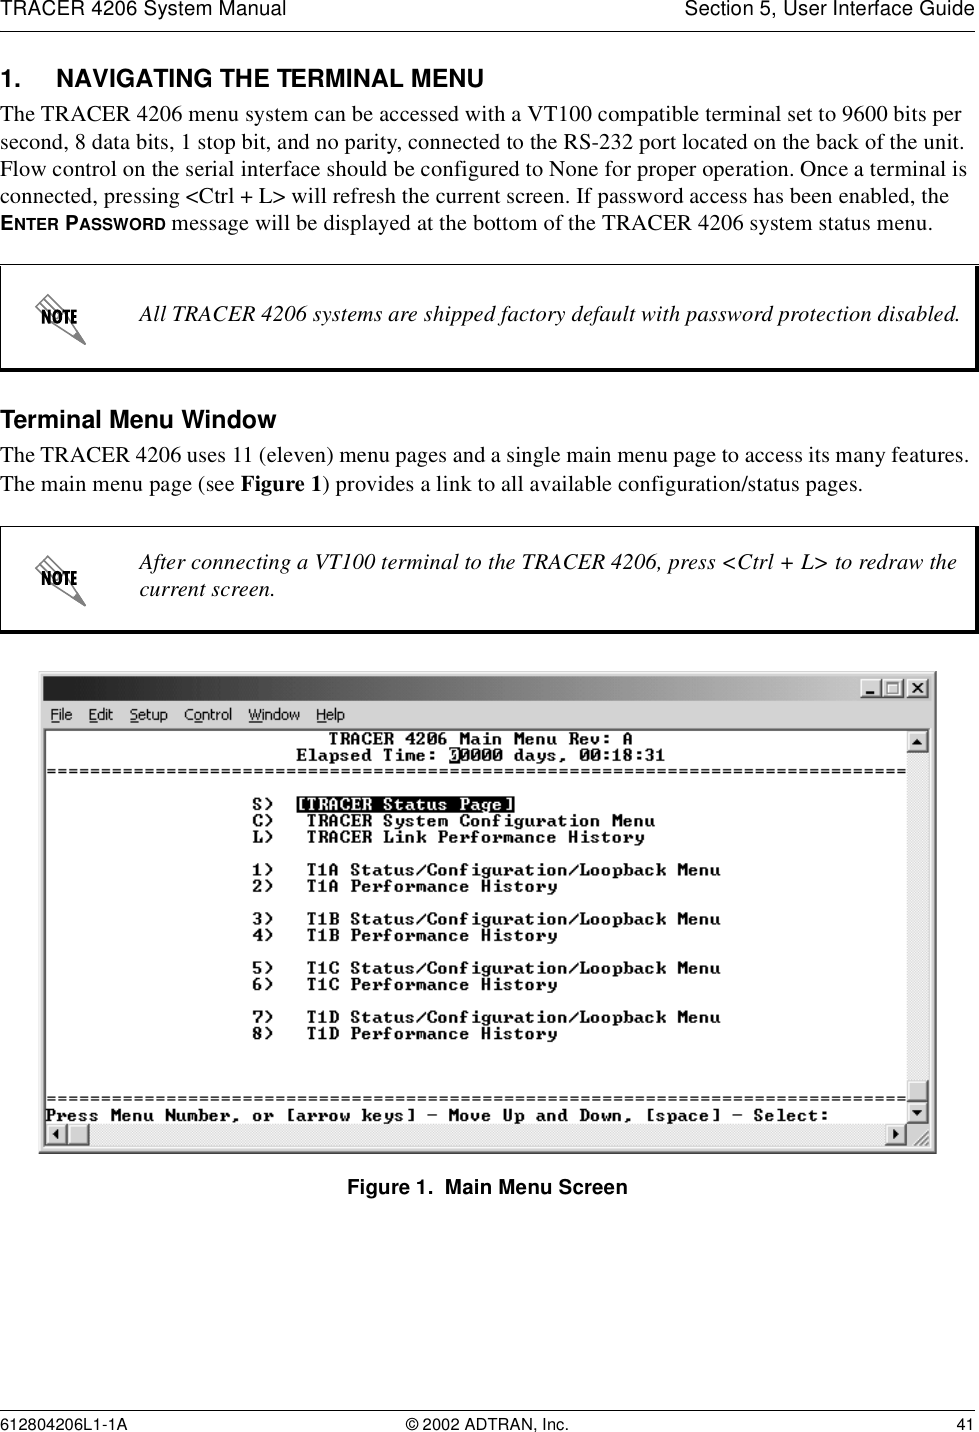 TRACER 4206 System Manual Section 5, User Interface Guide612804206L1-1A © 2002 ADTRAN, Inc. 411. NAVIGATING THE TERMINAL MENUThe TRACER 4206 menu system can be accessed with a VT100 compatible terminal set to 9600 bits per second, 8 data bits, 1 stop bit, and no parity, connected to the RS-232 port located on the back of the unit. Flow control on the serial interface should be configured to None for proper operation. Once a terminal is connected, pressing &lt;Ctrl + L&gt; will refresh the current screen. If password access has been enabled, the ENTER PASSWORD message will be displayed at the bottom of the TRACER 4206 system status menu. Terminal Menu WindowThe TRACER 4206 uses 11 (eleven) menu pages and a single main menu page to access its many features. The main menu page (see Figure 1) provides a link to all available configuration/status pages.Figure 1.  Main Menu ScreenAll TRACER 4206 systems are shipped factory default with password protection disabled.After connecting a VT100 terminal to the TRACER 4206, press &lt;Ctrl + L&gt; to redraw the current screen.